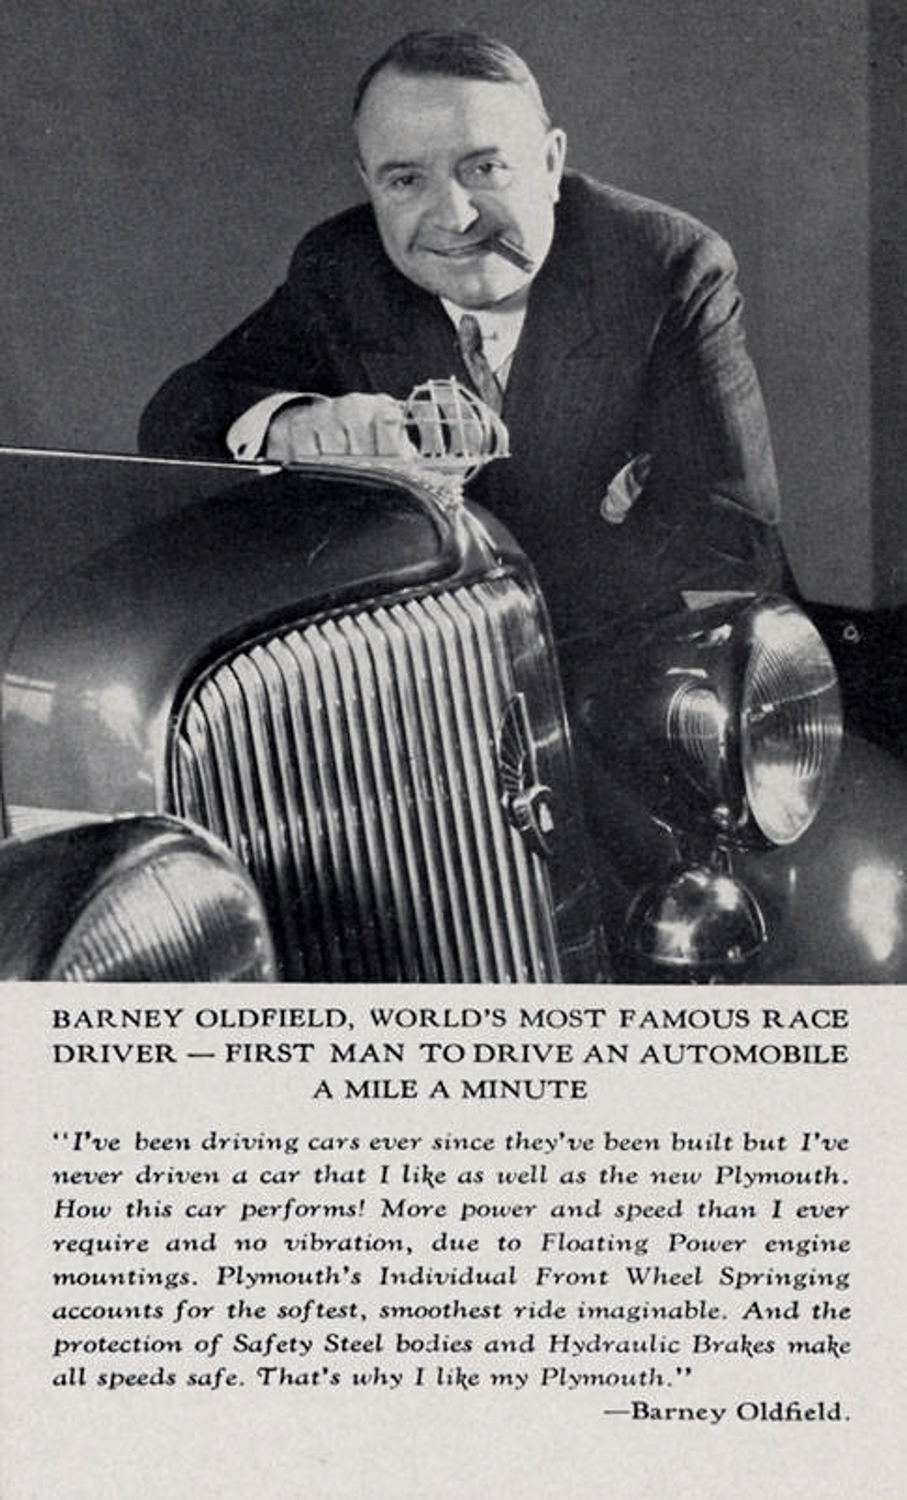 No longer racing, Oldfield took on many jobs, including being Plymouth's "highway advisor." 